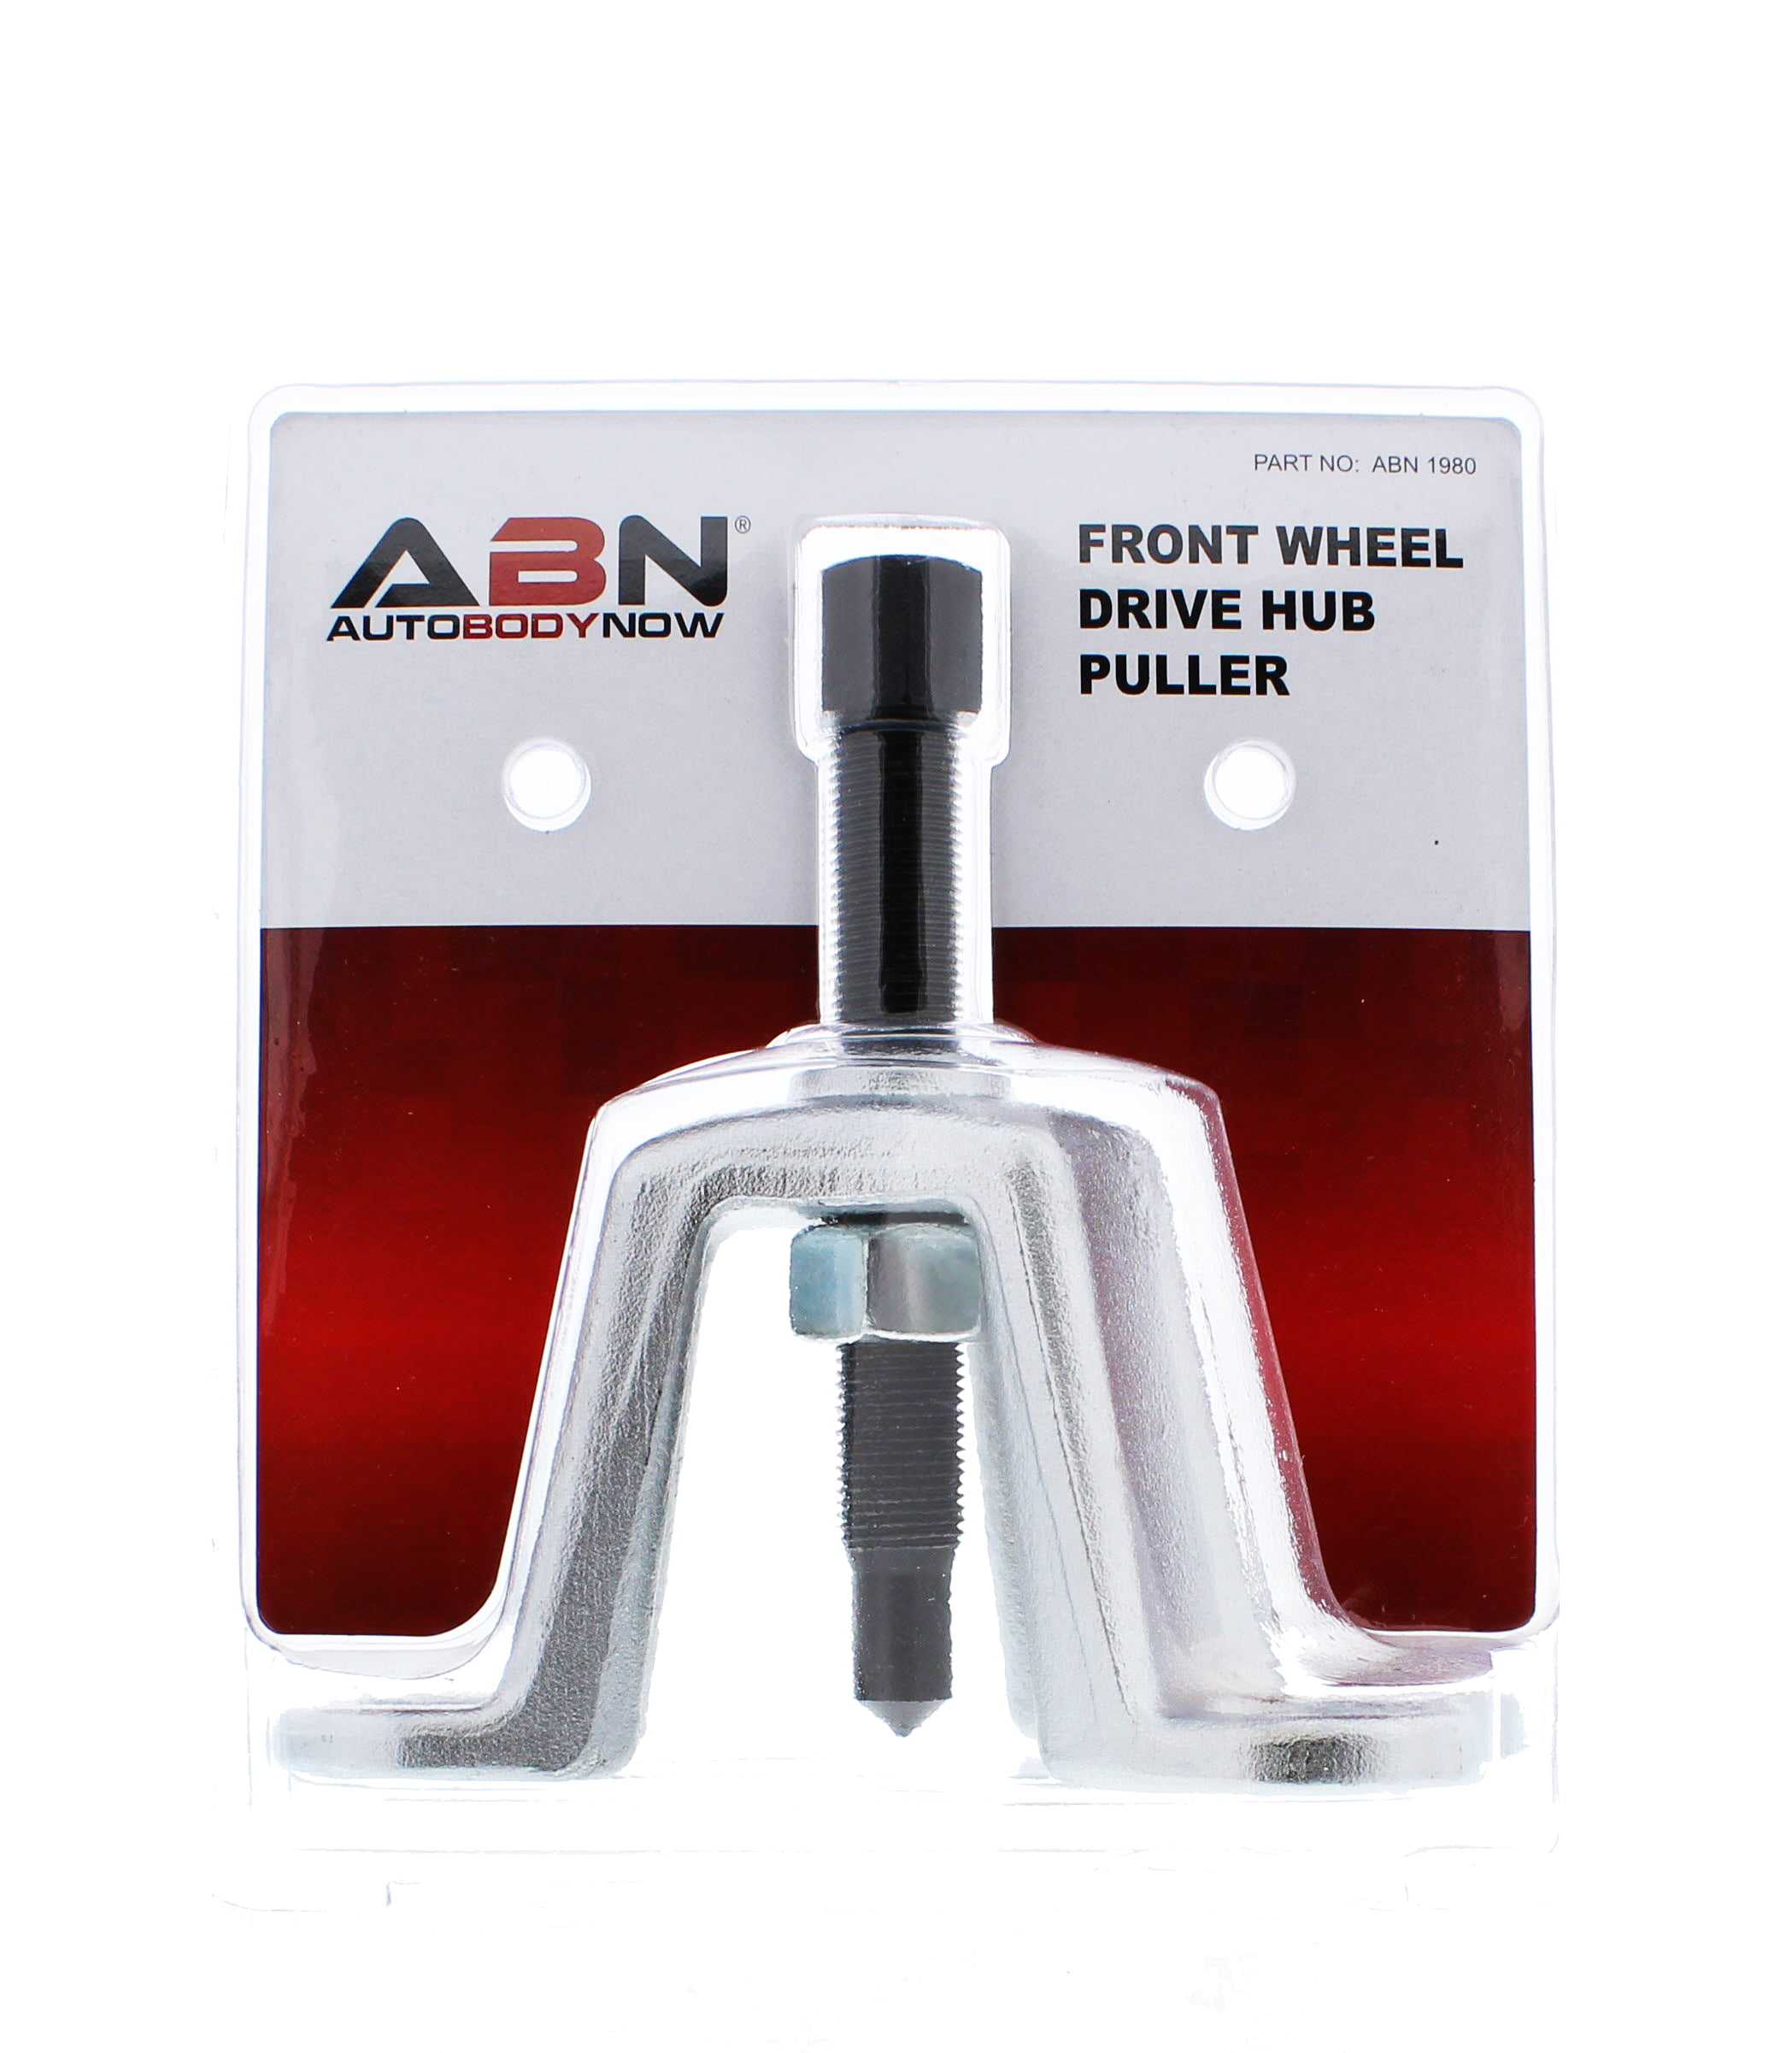 Flange Type Tool 3-3/4 to 4-1/2 Inches Power Steering Pulley Remover Hub Grappler KIE Front Hub Installer Puller Tool Axle & Front Wheel Hub Puller Universal Tools Front Wheel Drive Cars 